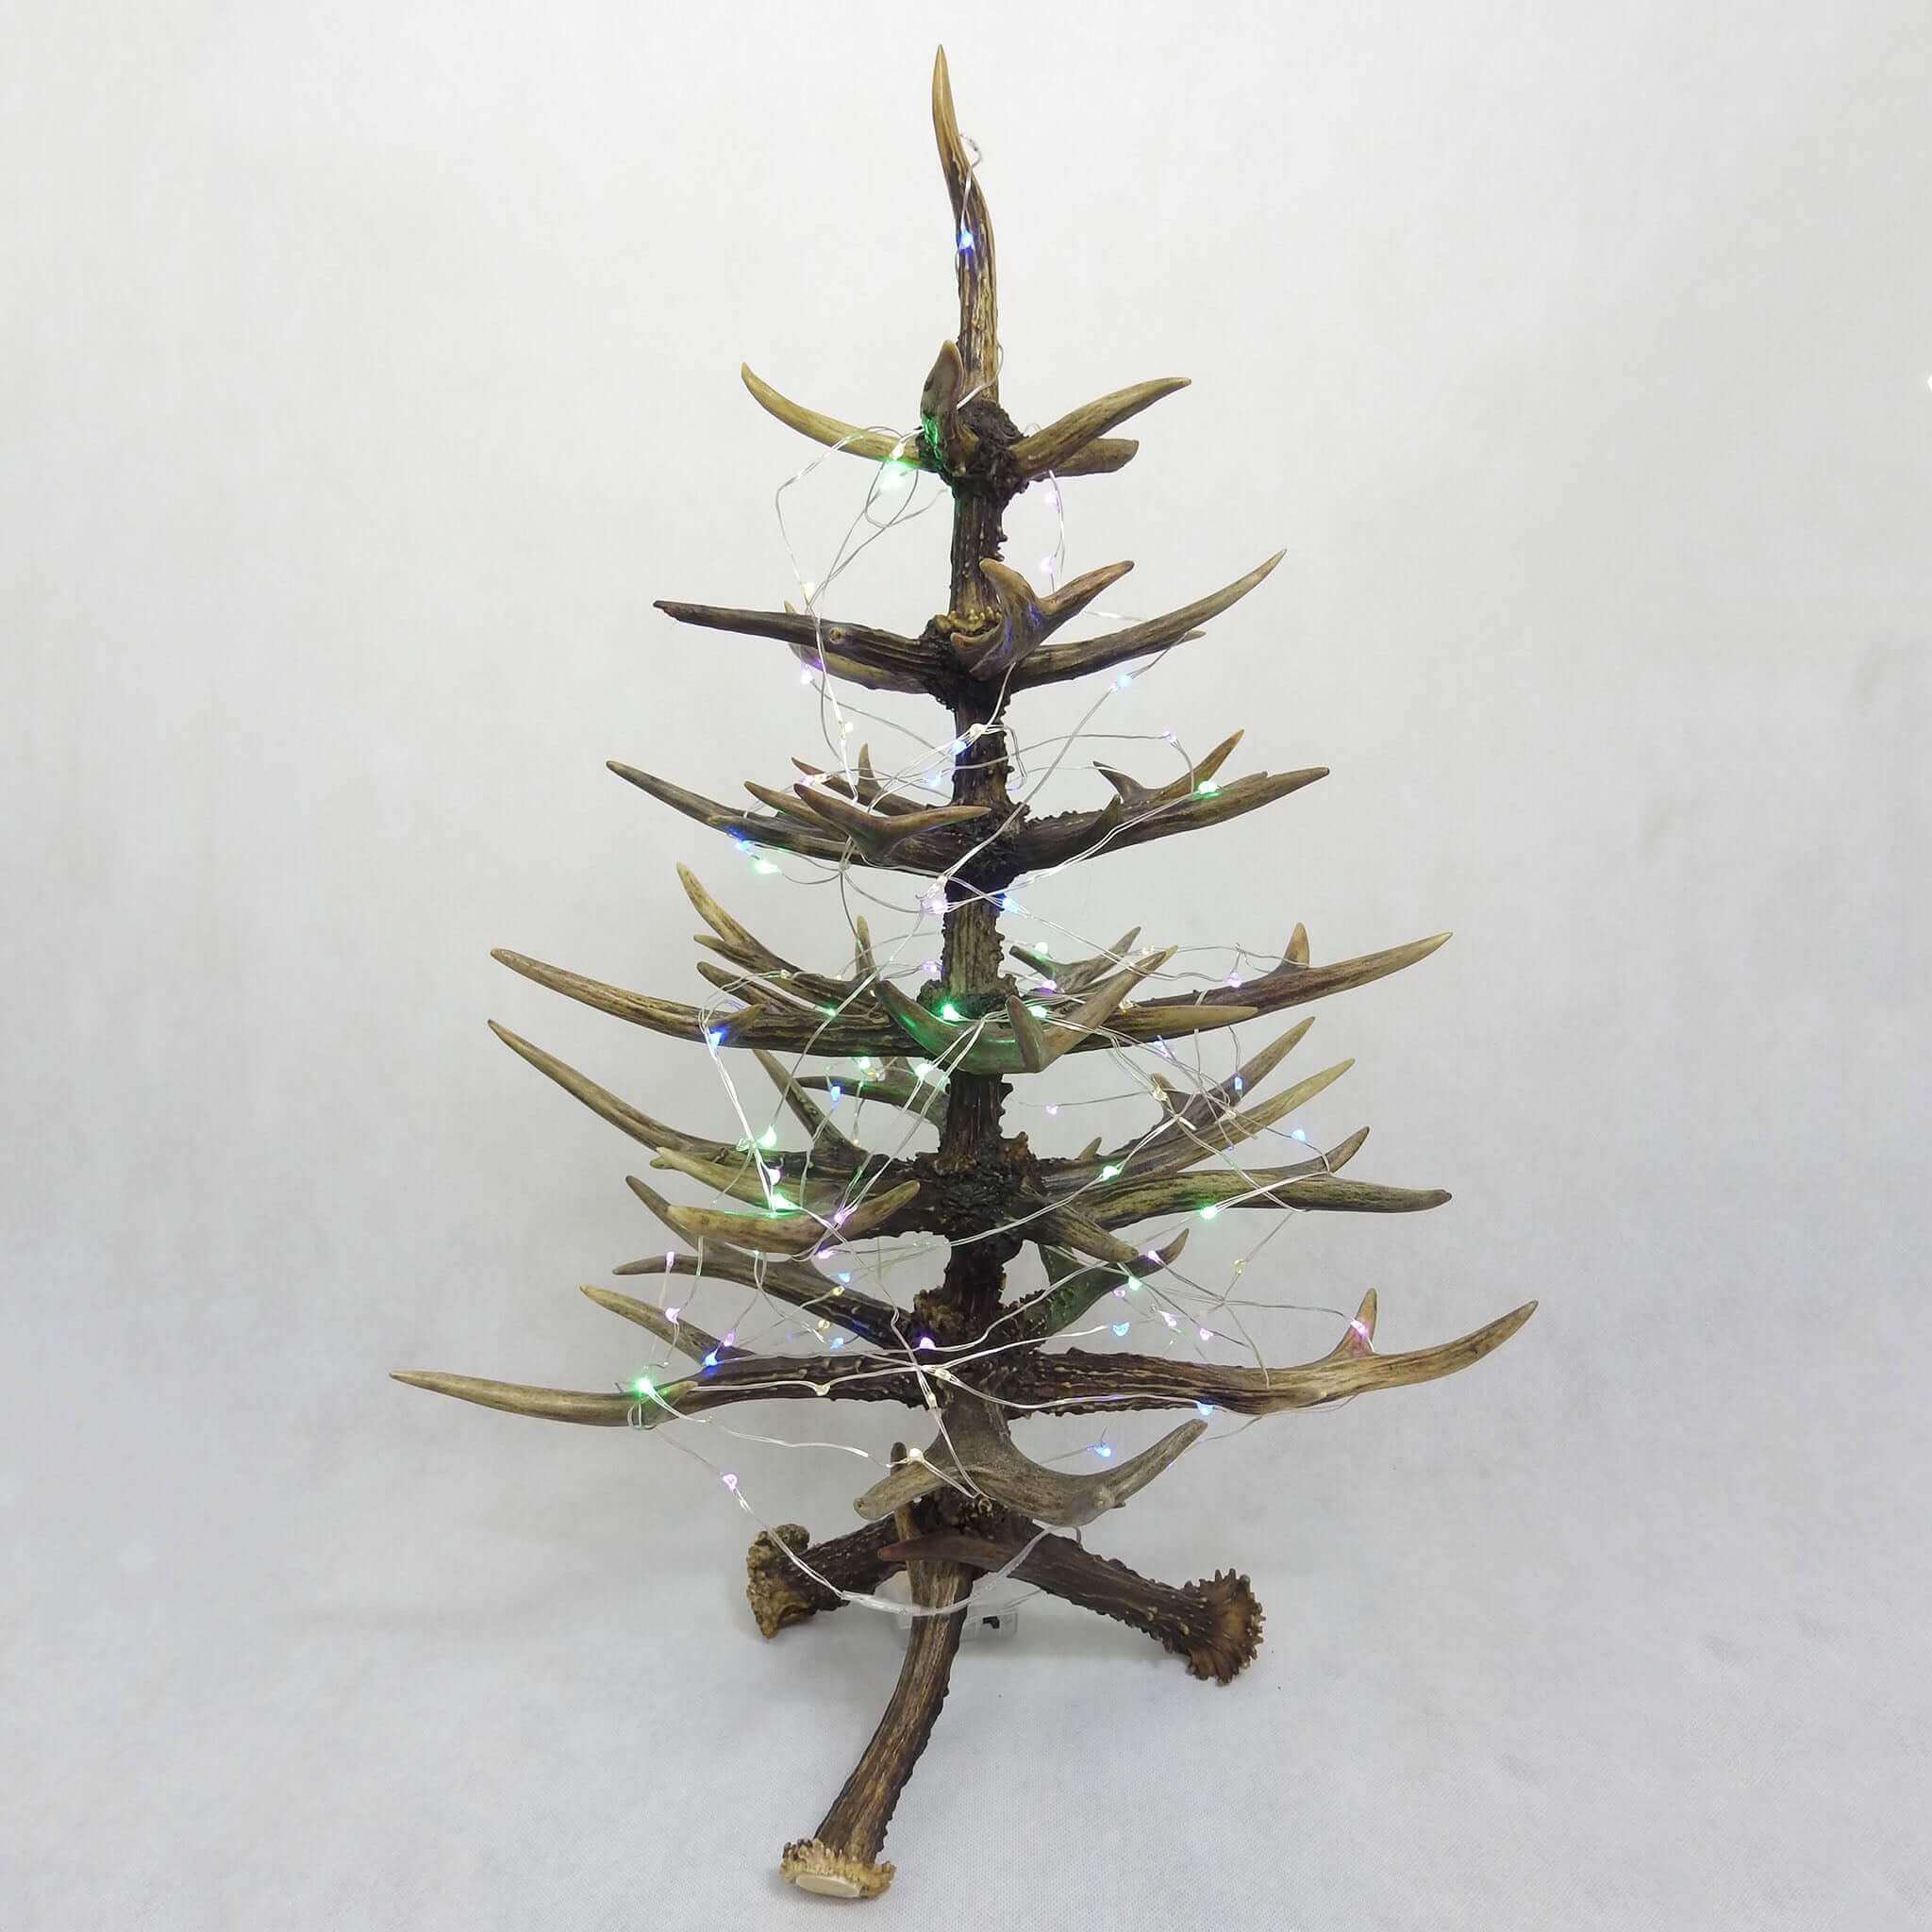 Bring a rustic charm to your holiday decor with this real deer antler Christmas tree.